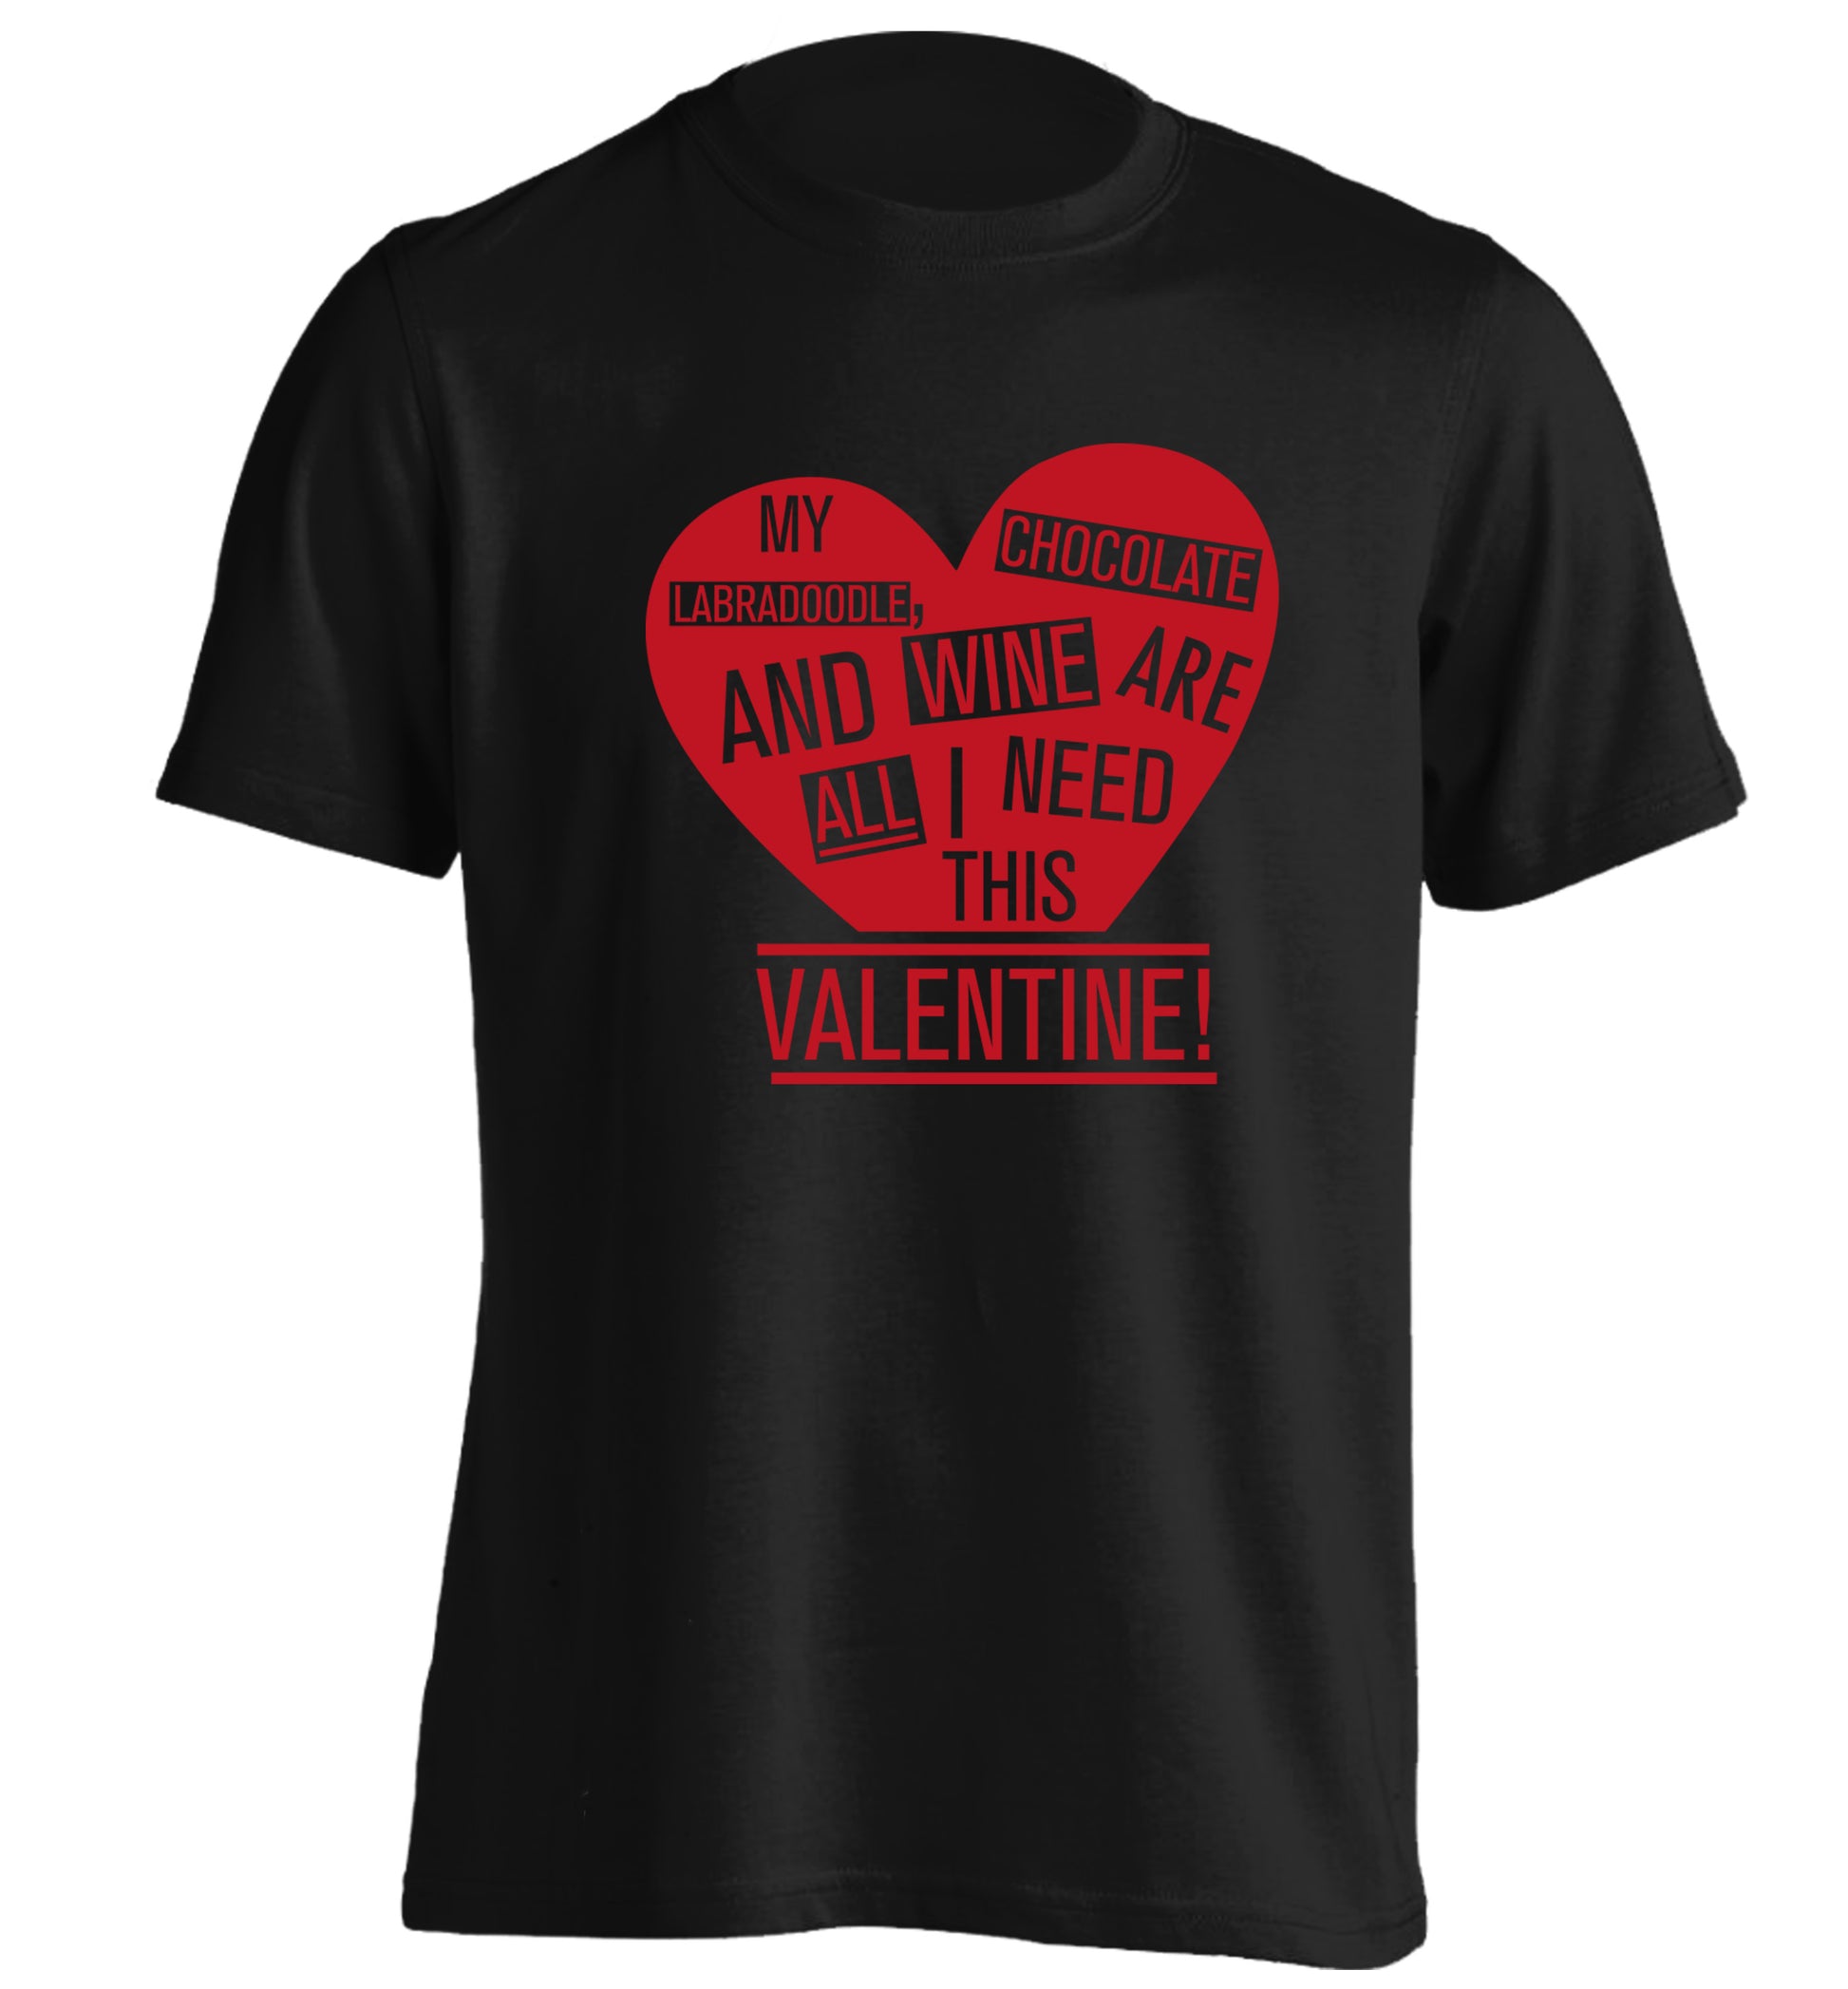 My labradoodle, chocolate and wine are all I need this valentine! adults unisex black Tshirt 2XL